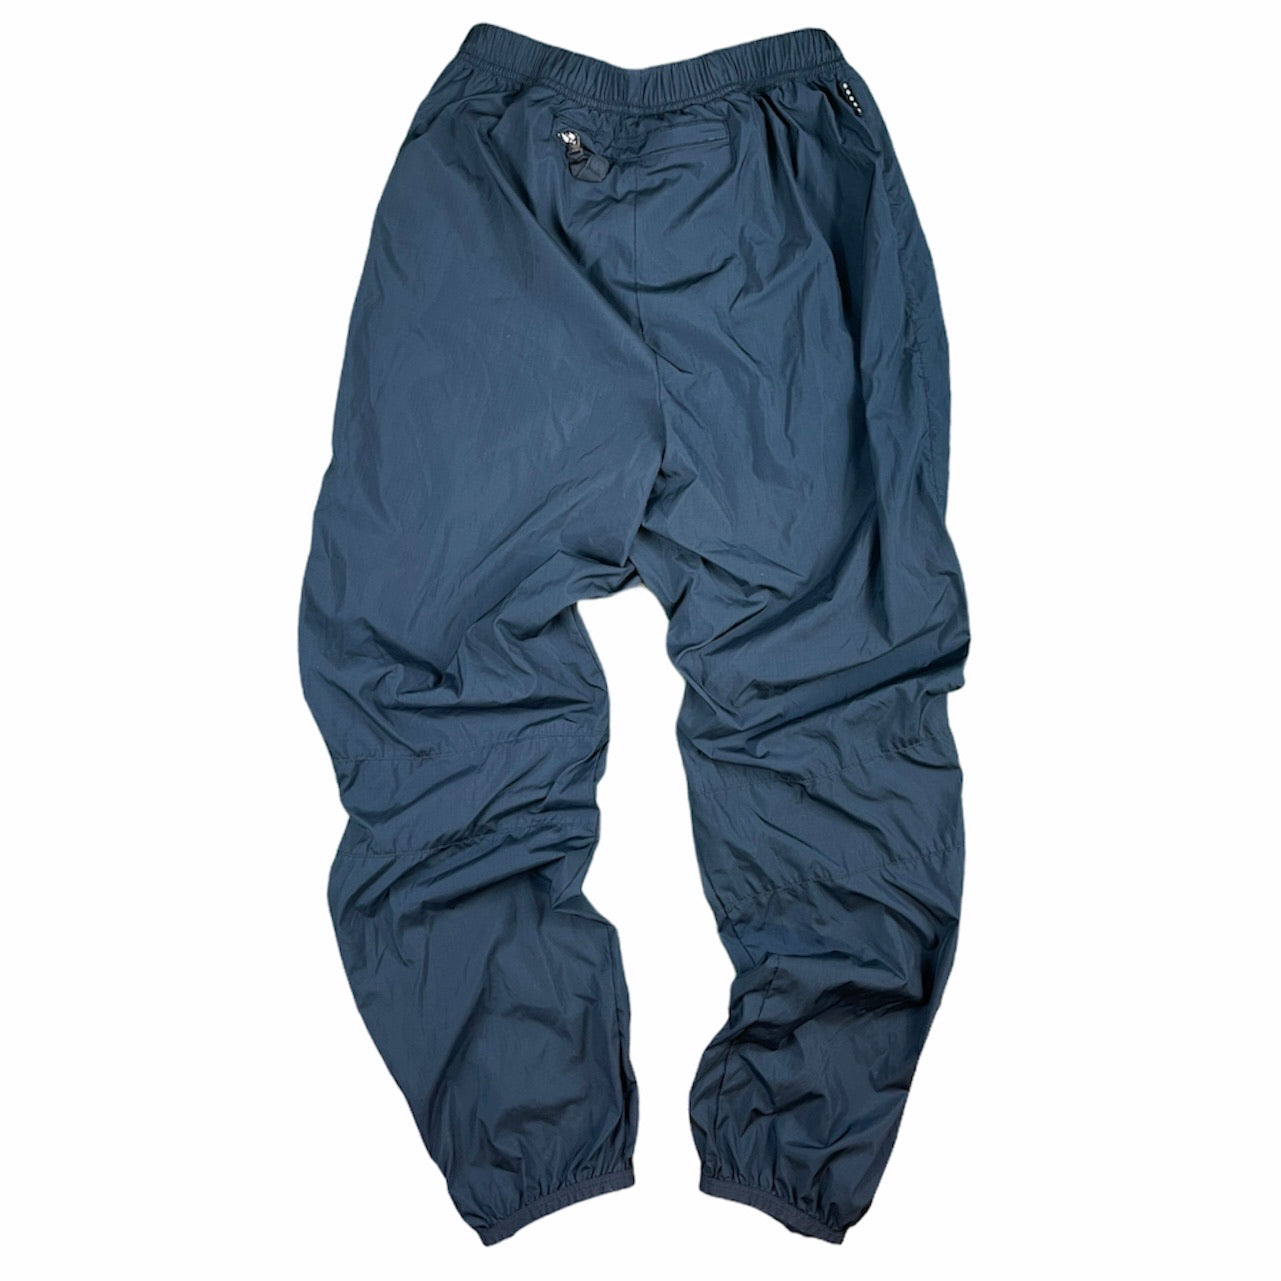 2000s Nike ACG clima-fit tracksuit bottoms